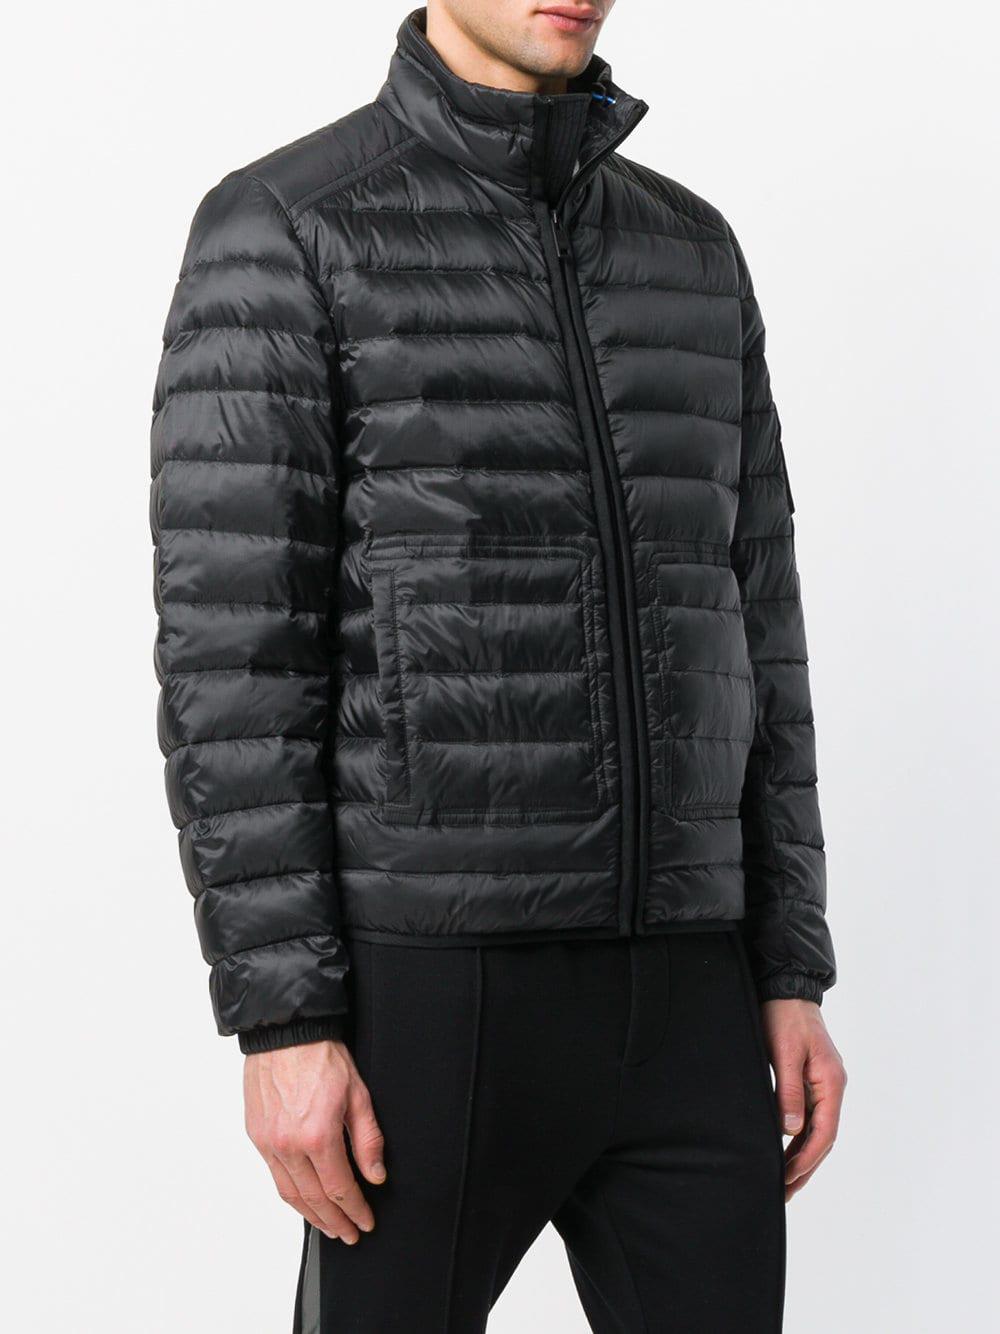 Prada Quilted Shell Down Jacket in Black for Men - Lyst